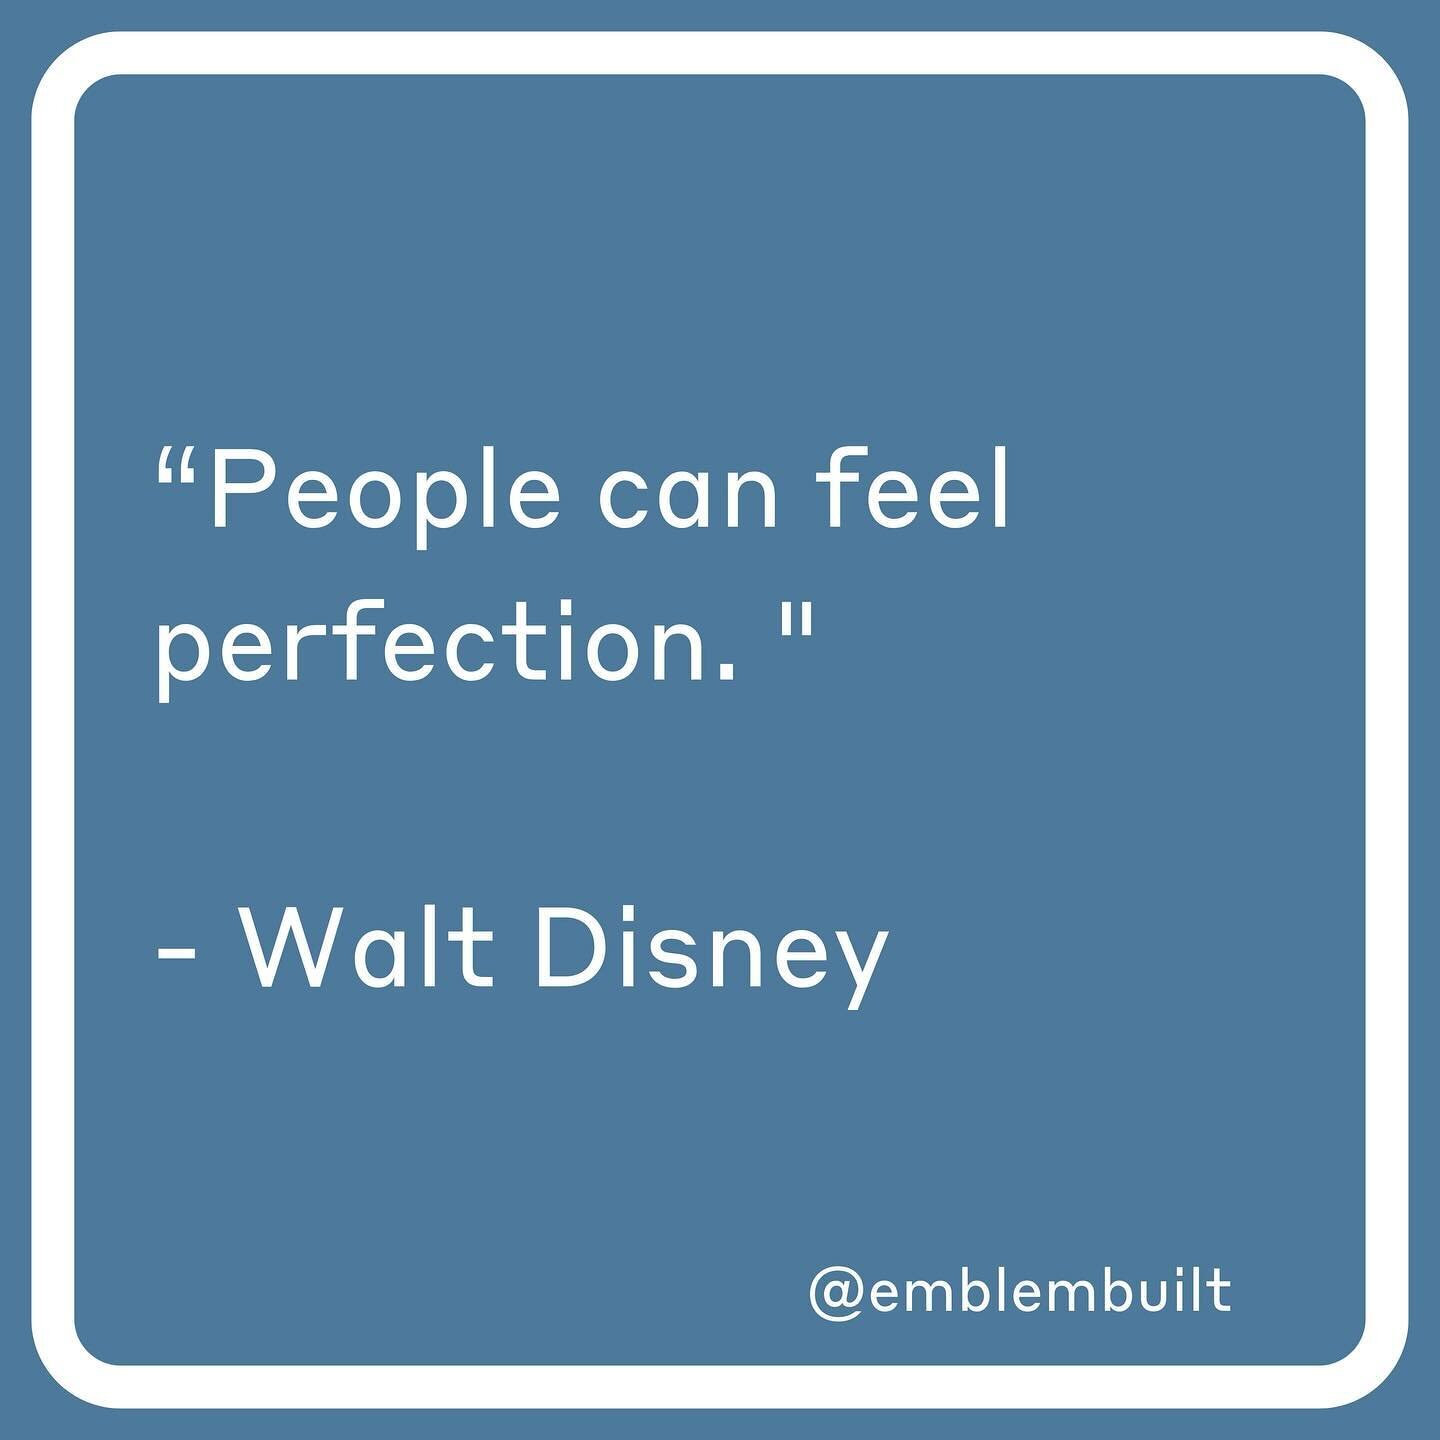 We frequently repeat these wise words by Walt Disney. In furniture, you can often feel the perfection of a design before you even sit down. It&rsquo;s the little things coming together all at once. It&rsquo;s recognizing the hands and hearts that hav